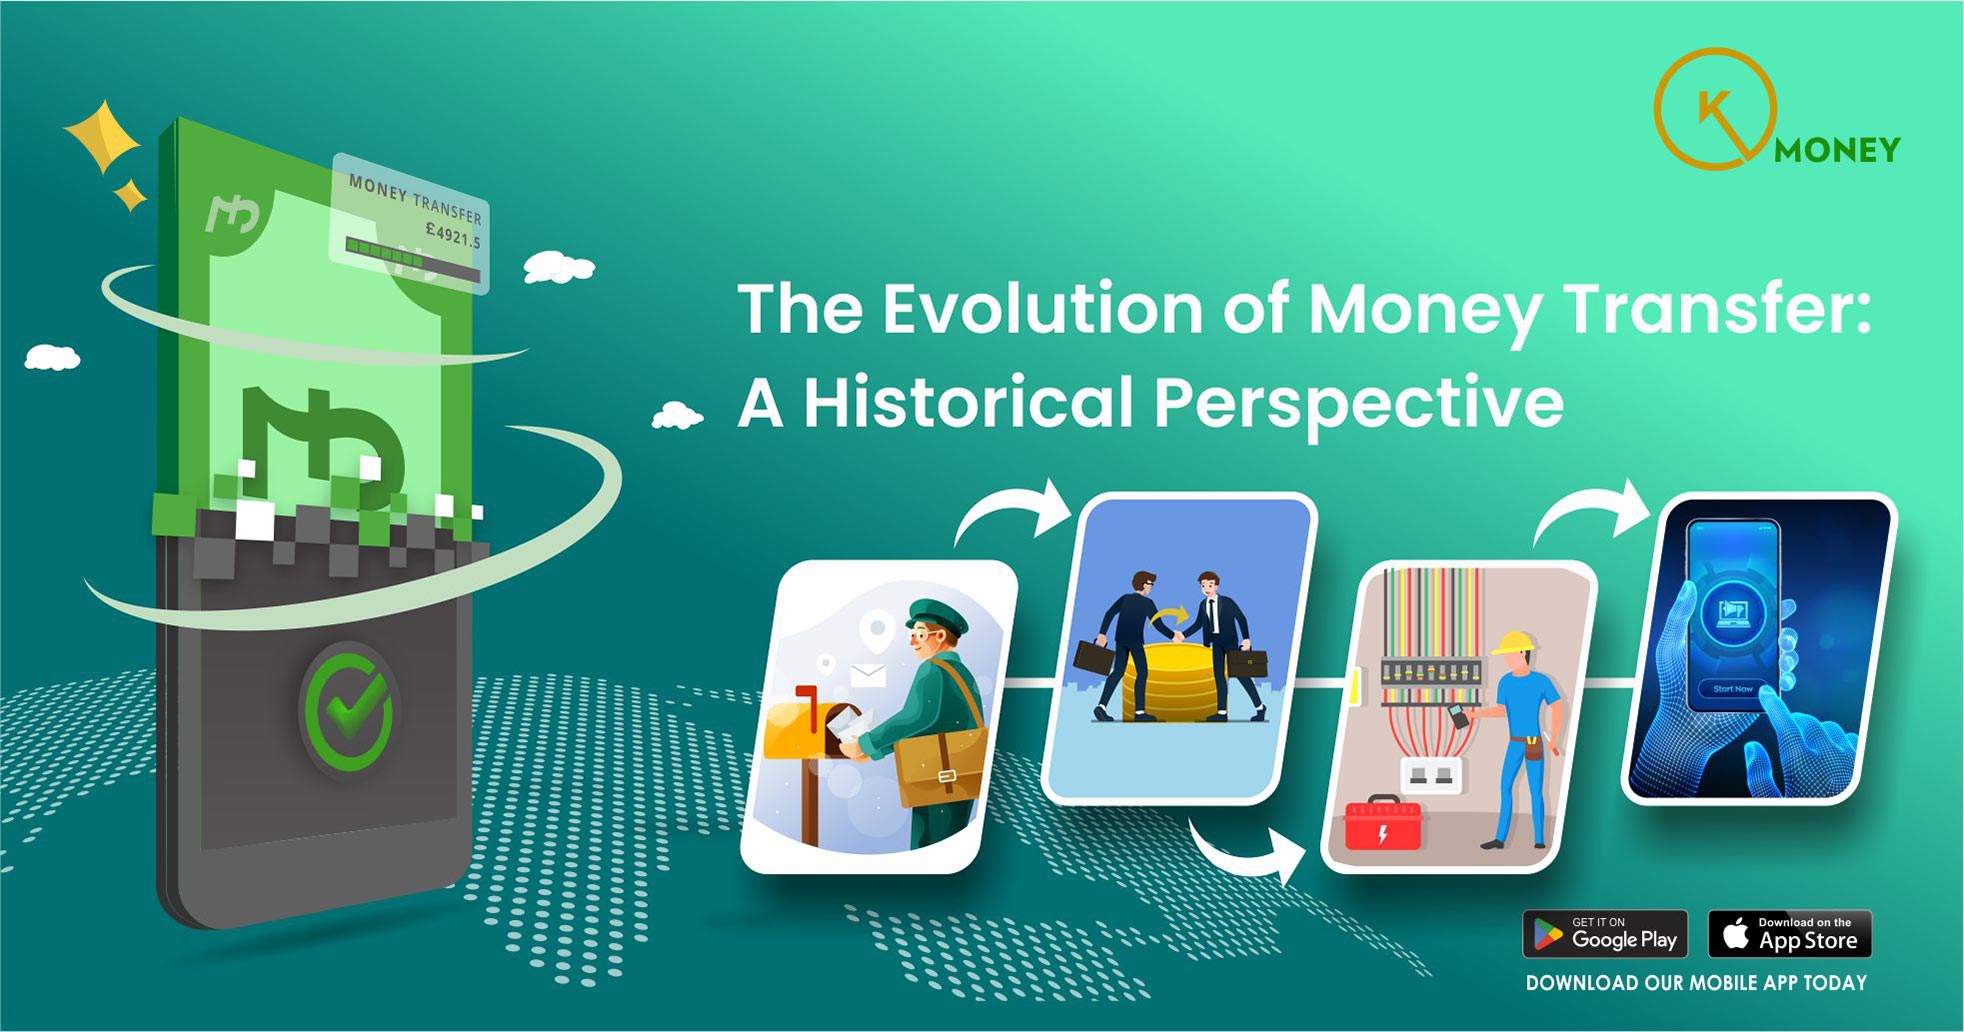 The Evolution of Money Transfer: A Historical Perspective